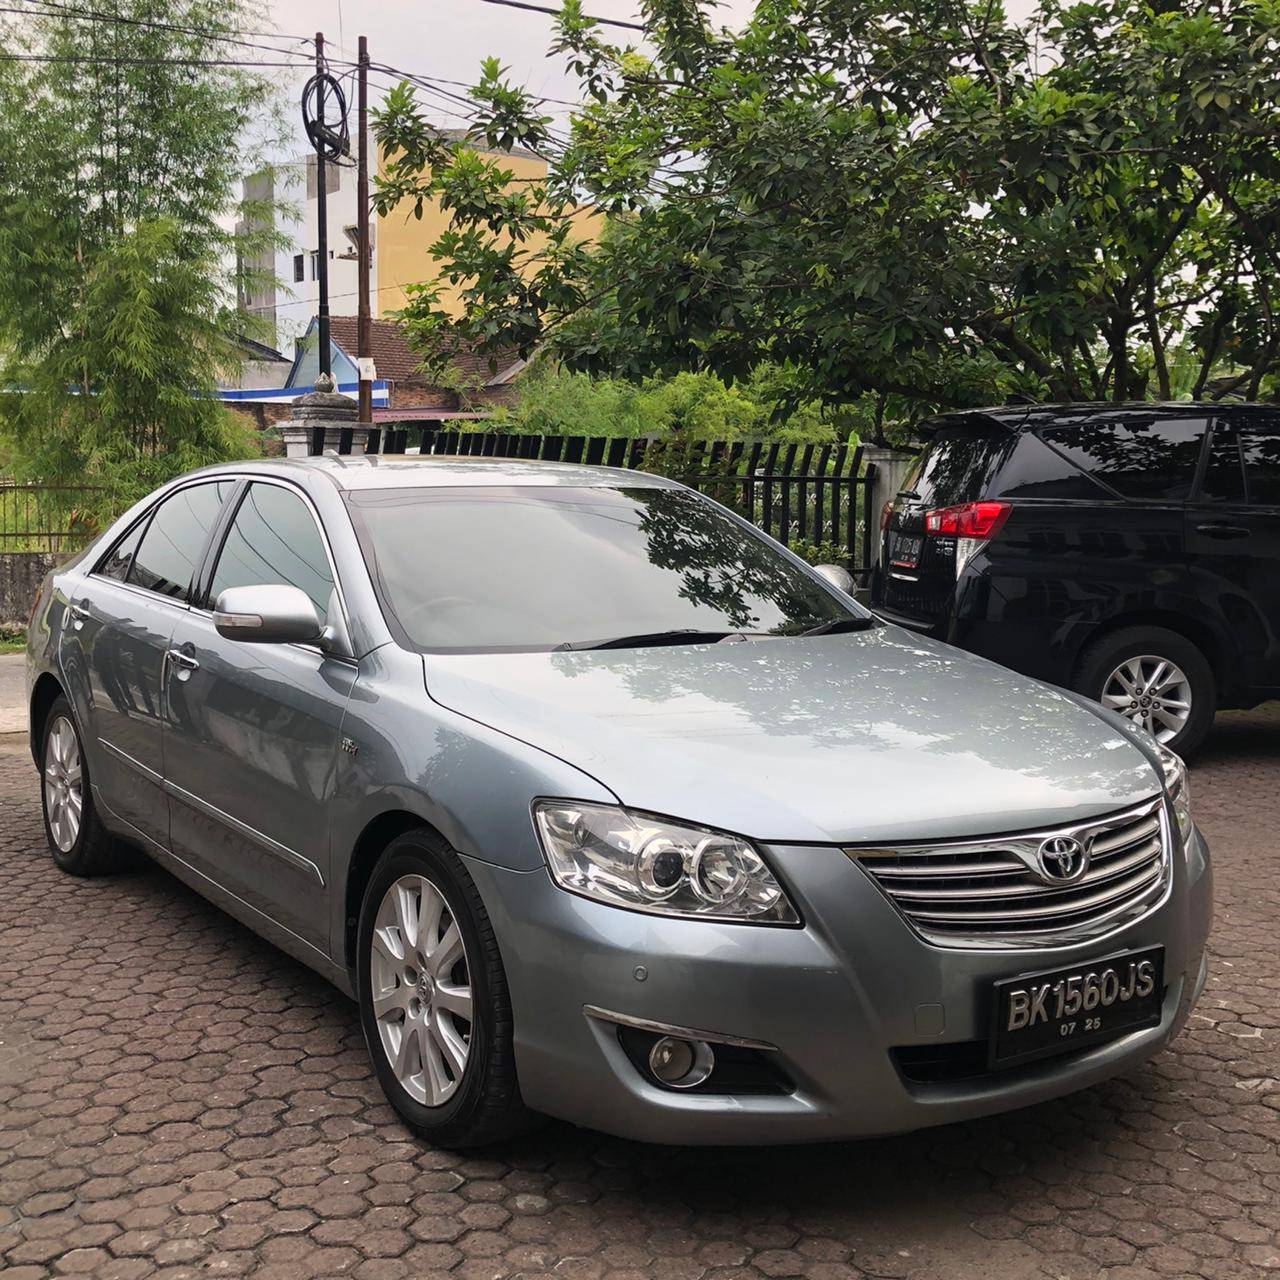 2008 Toyota Camry  V 2.4 A/T LUX V 2.4 A/T LUX tua